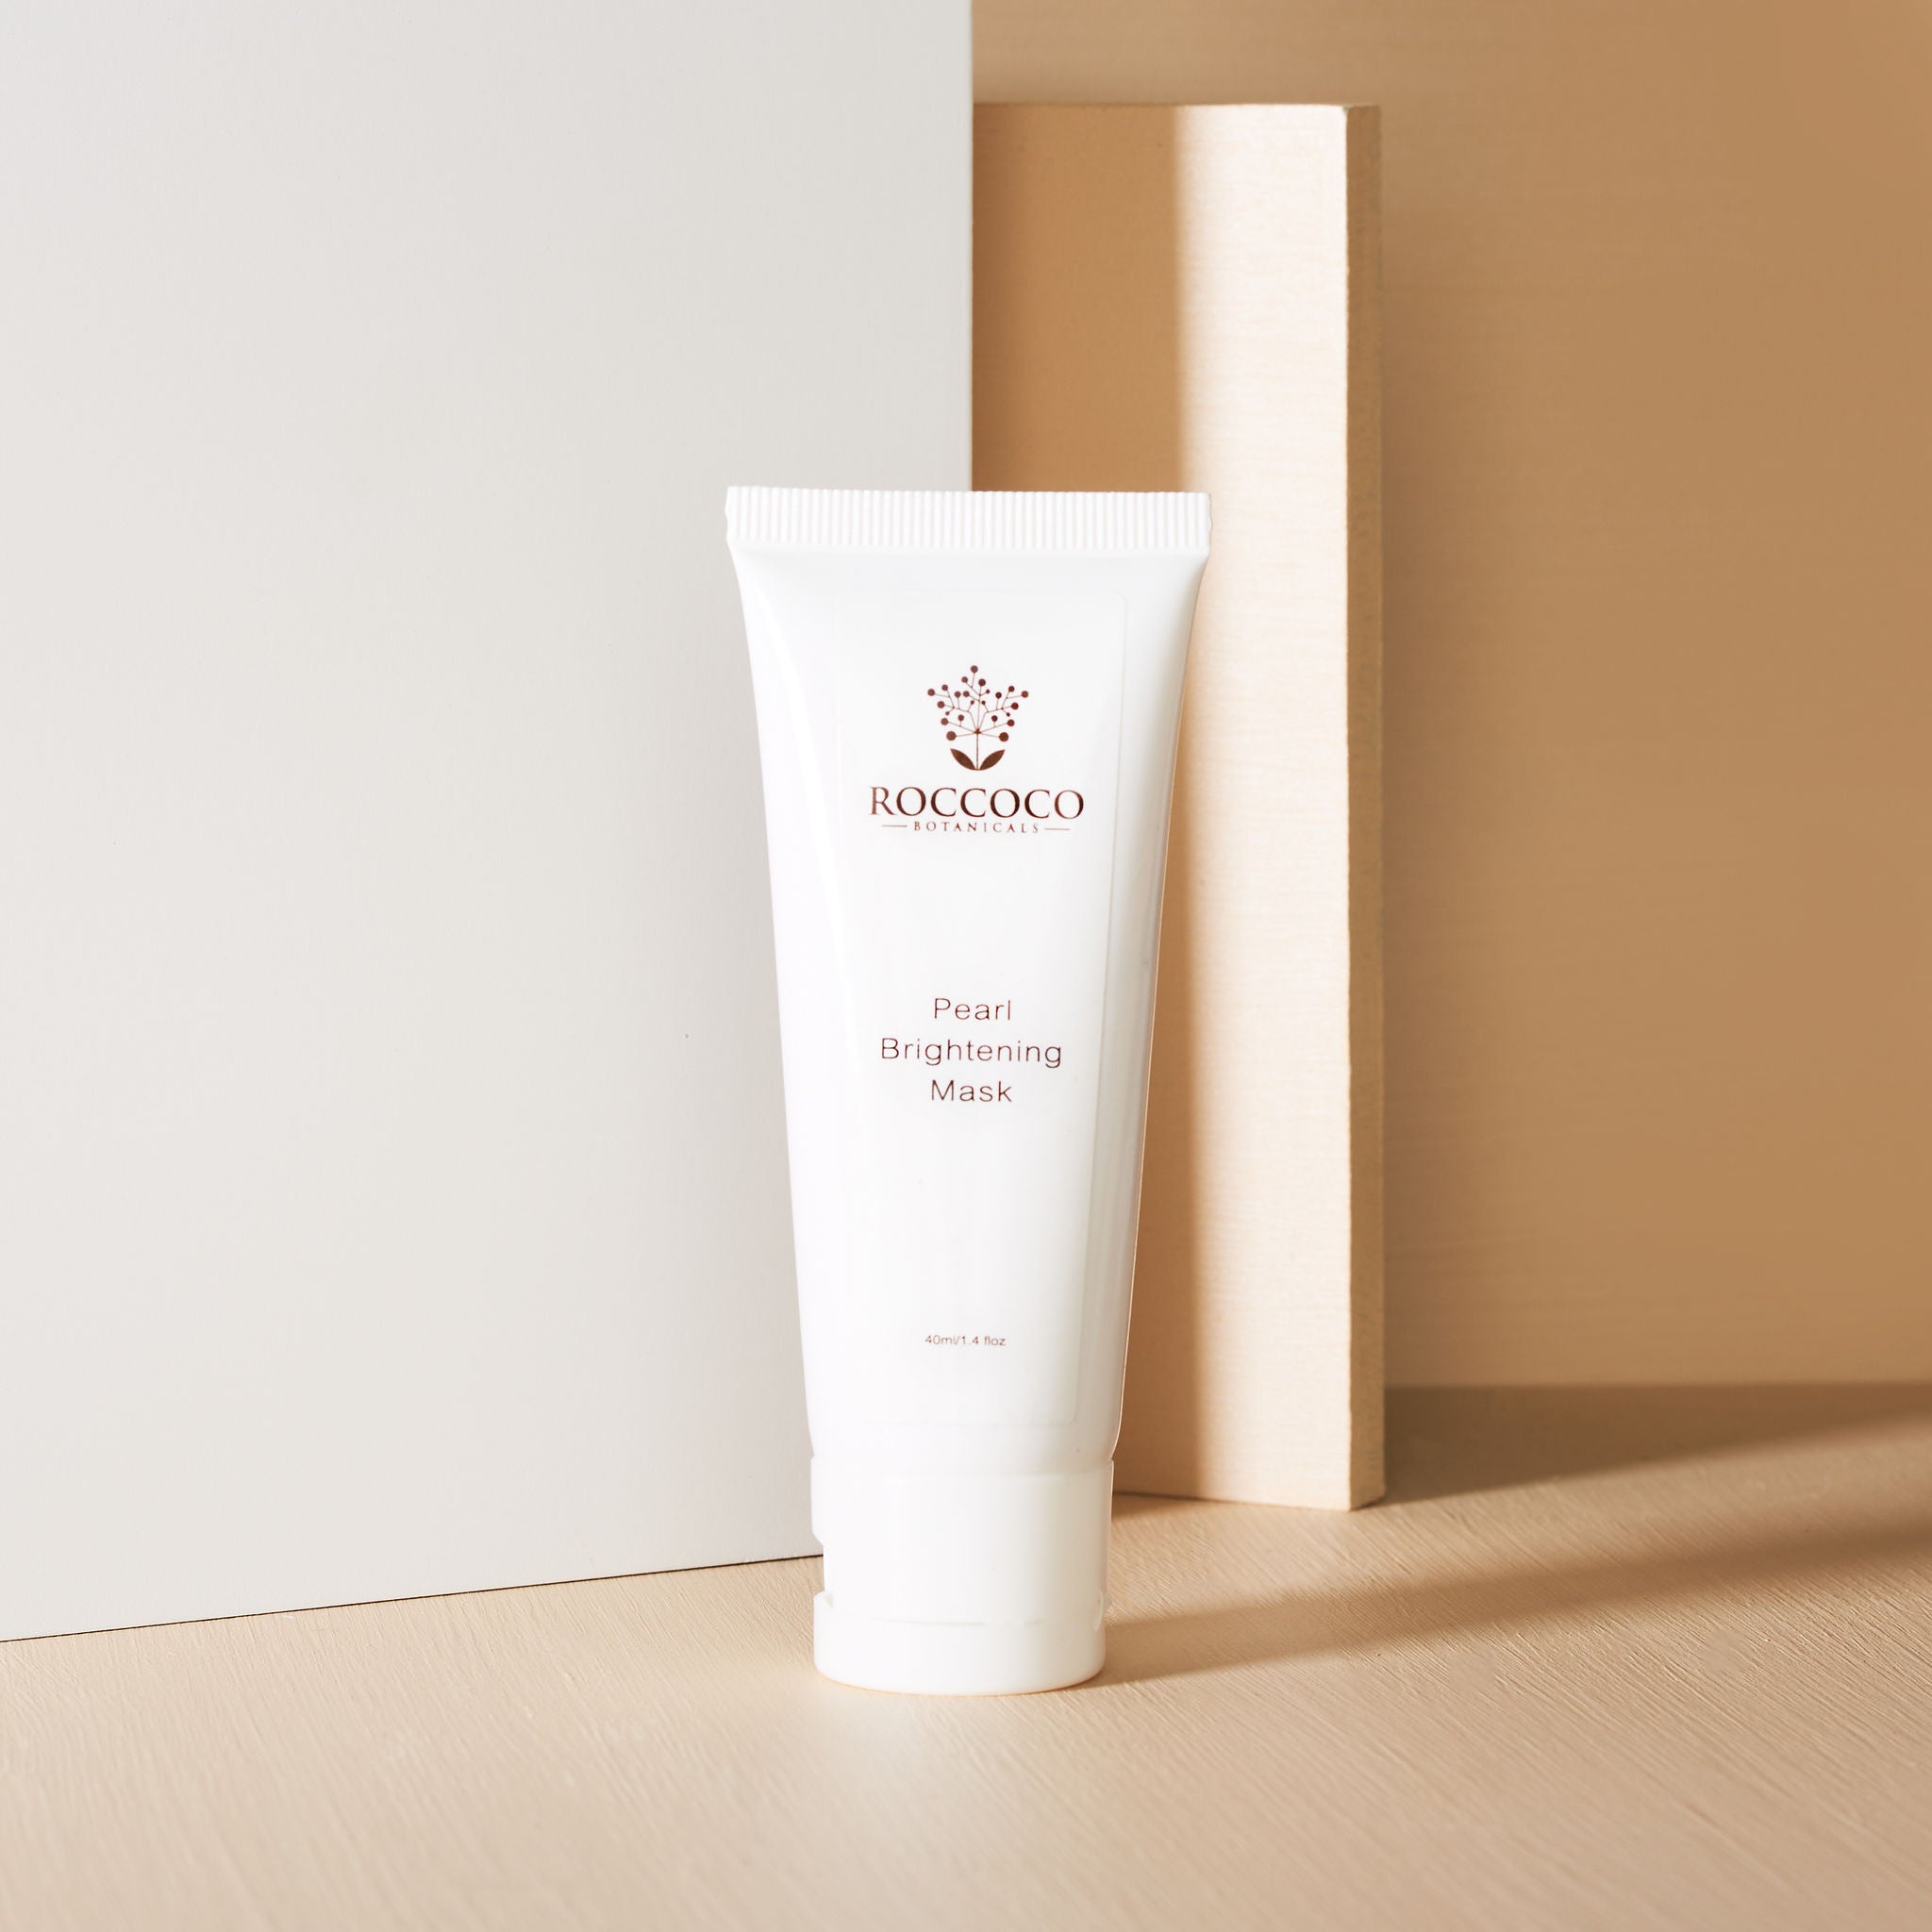 Pearl Brightening Mask - Click to Buy!